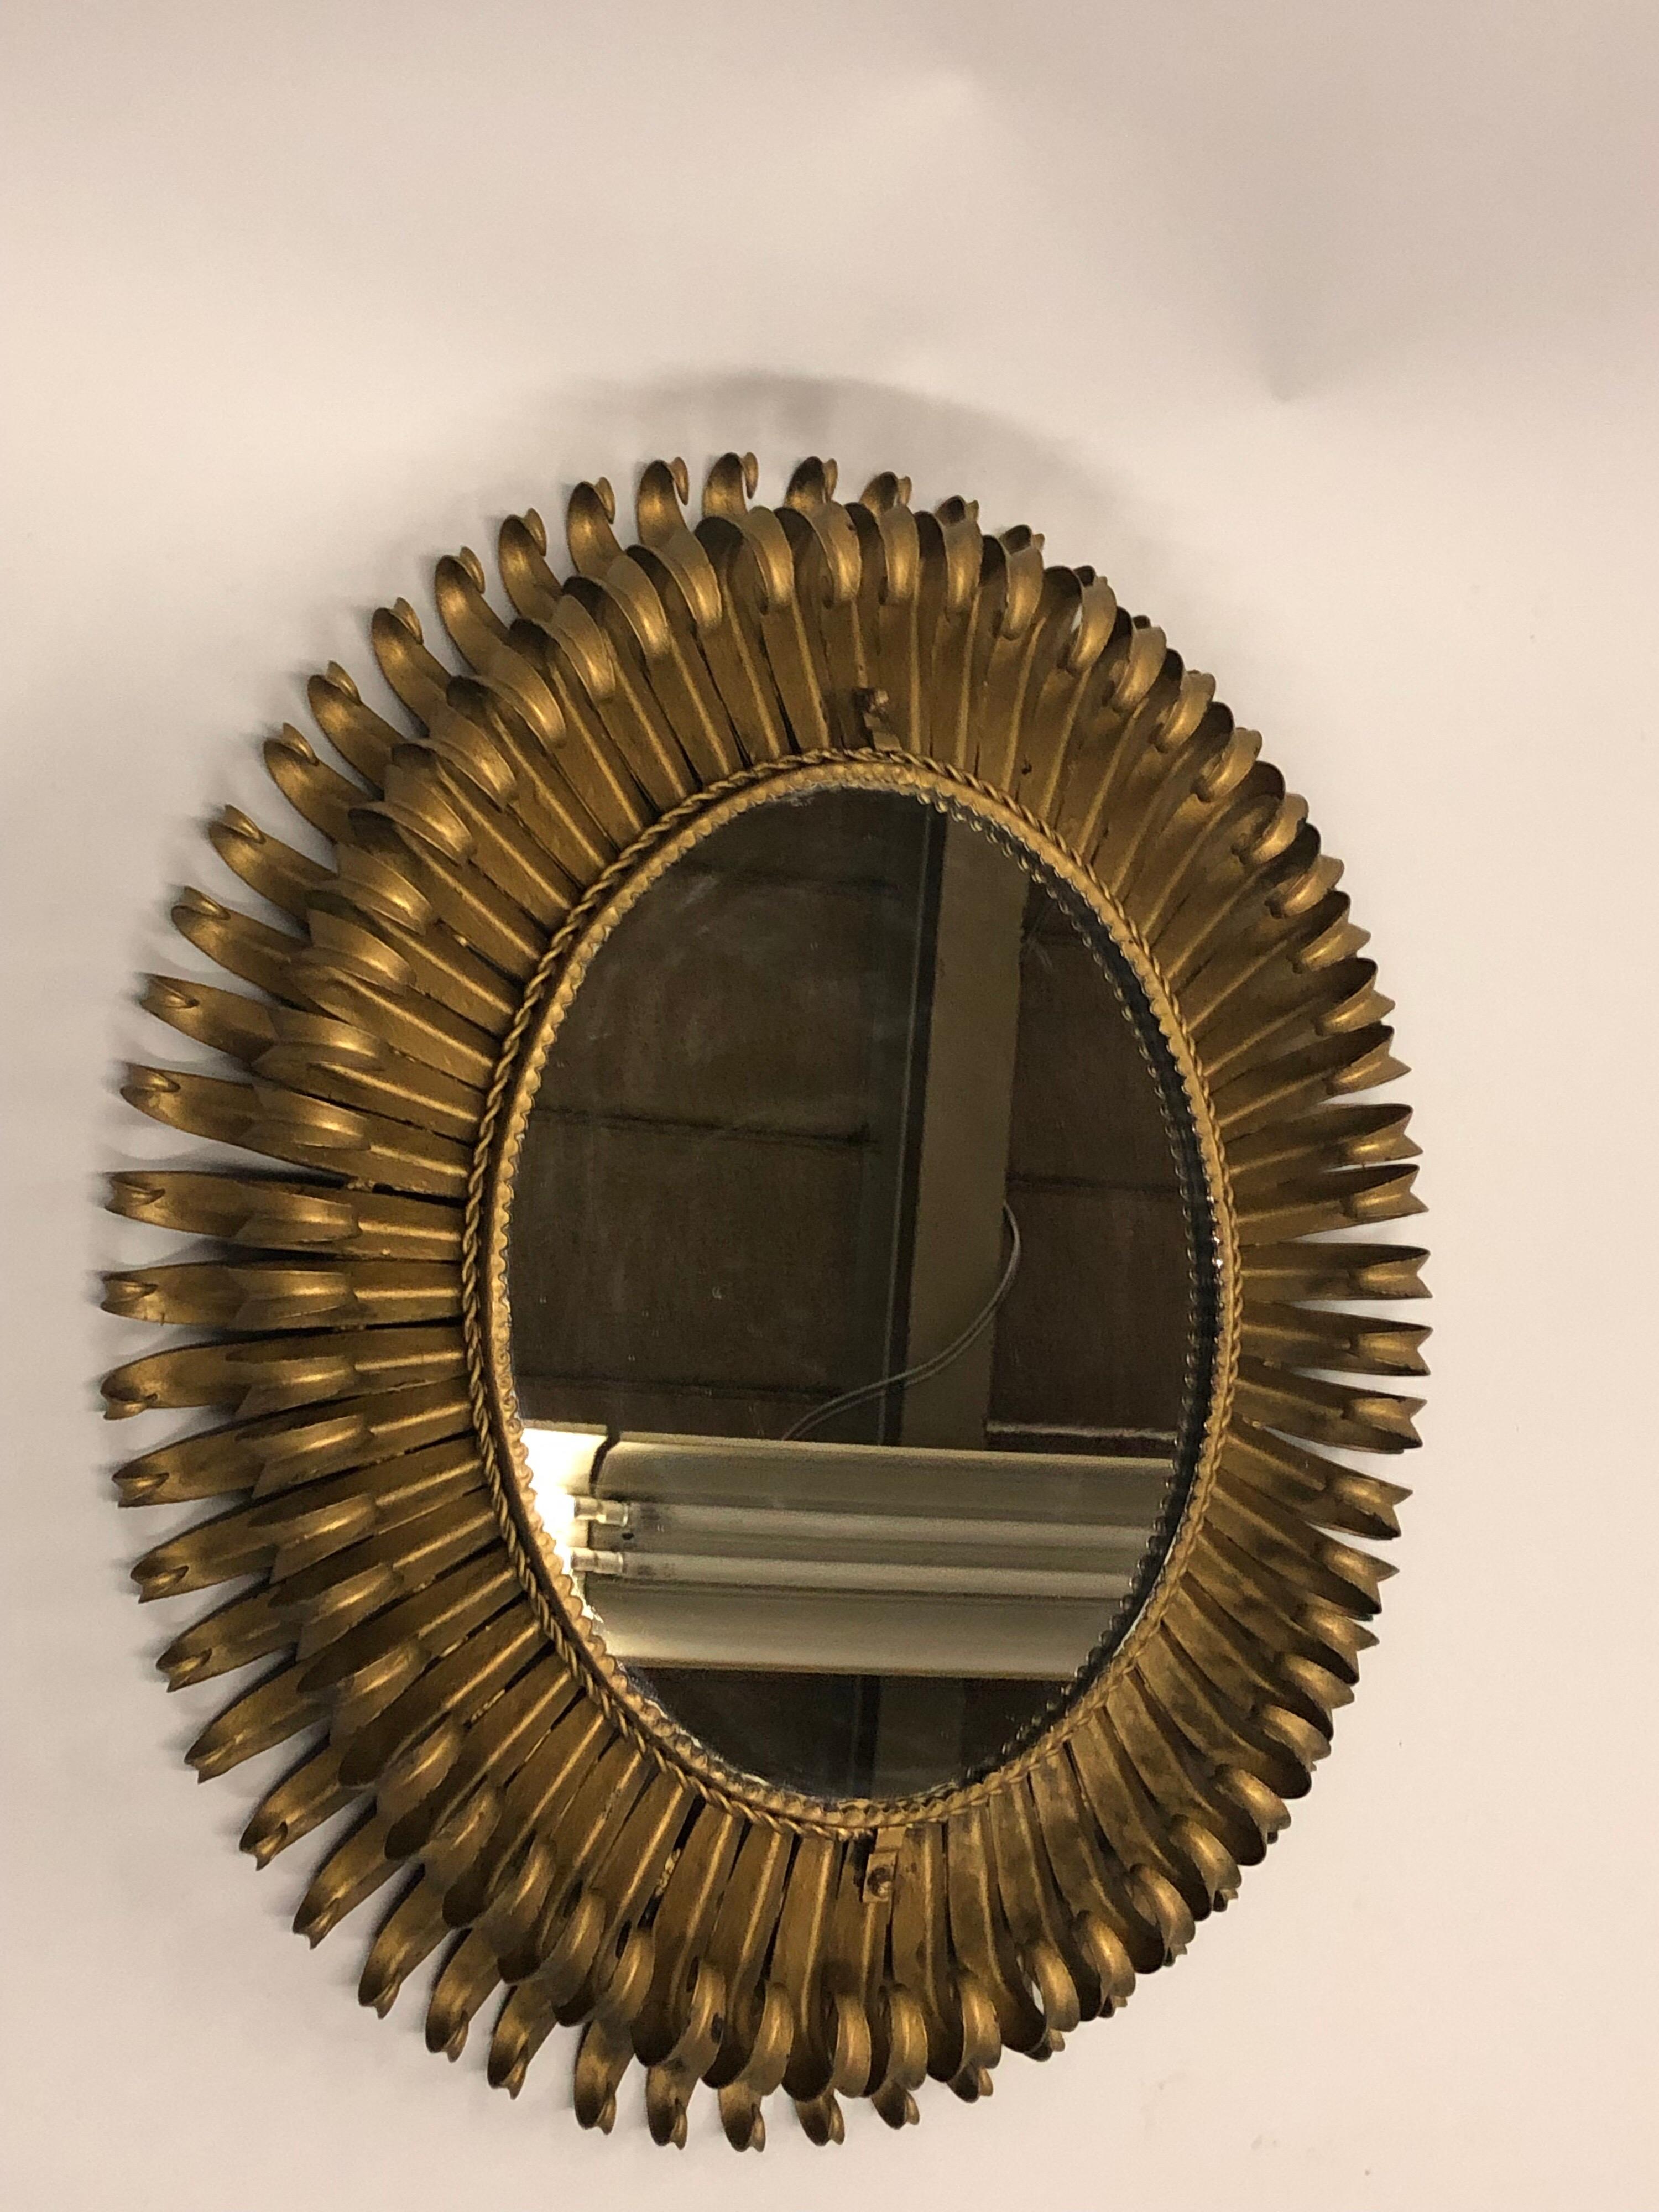 A Unique French Mid-Century Modern Neoclassical oval form wall / sunburst mirror with double level projections in the style of the French legendary ironworker of the 1940's: Gilbert Poillerat. The piece is dramatic and iconic with its double level